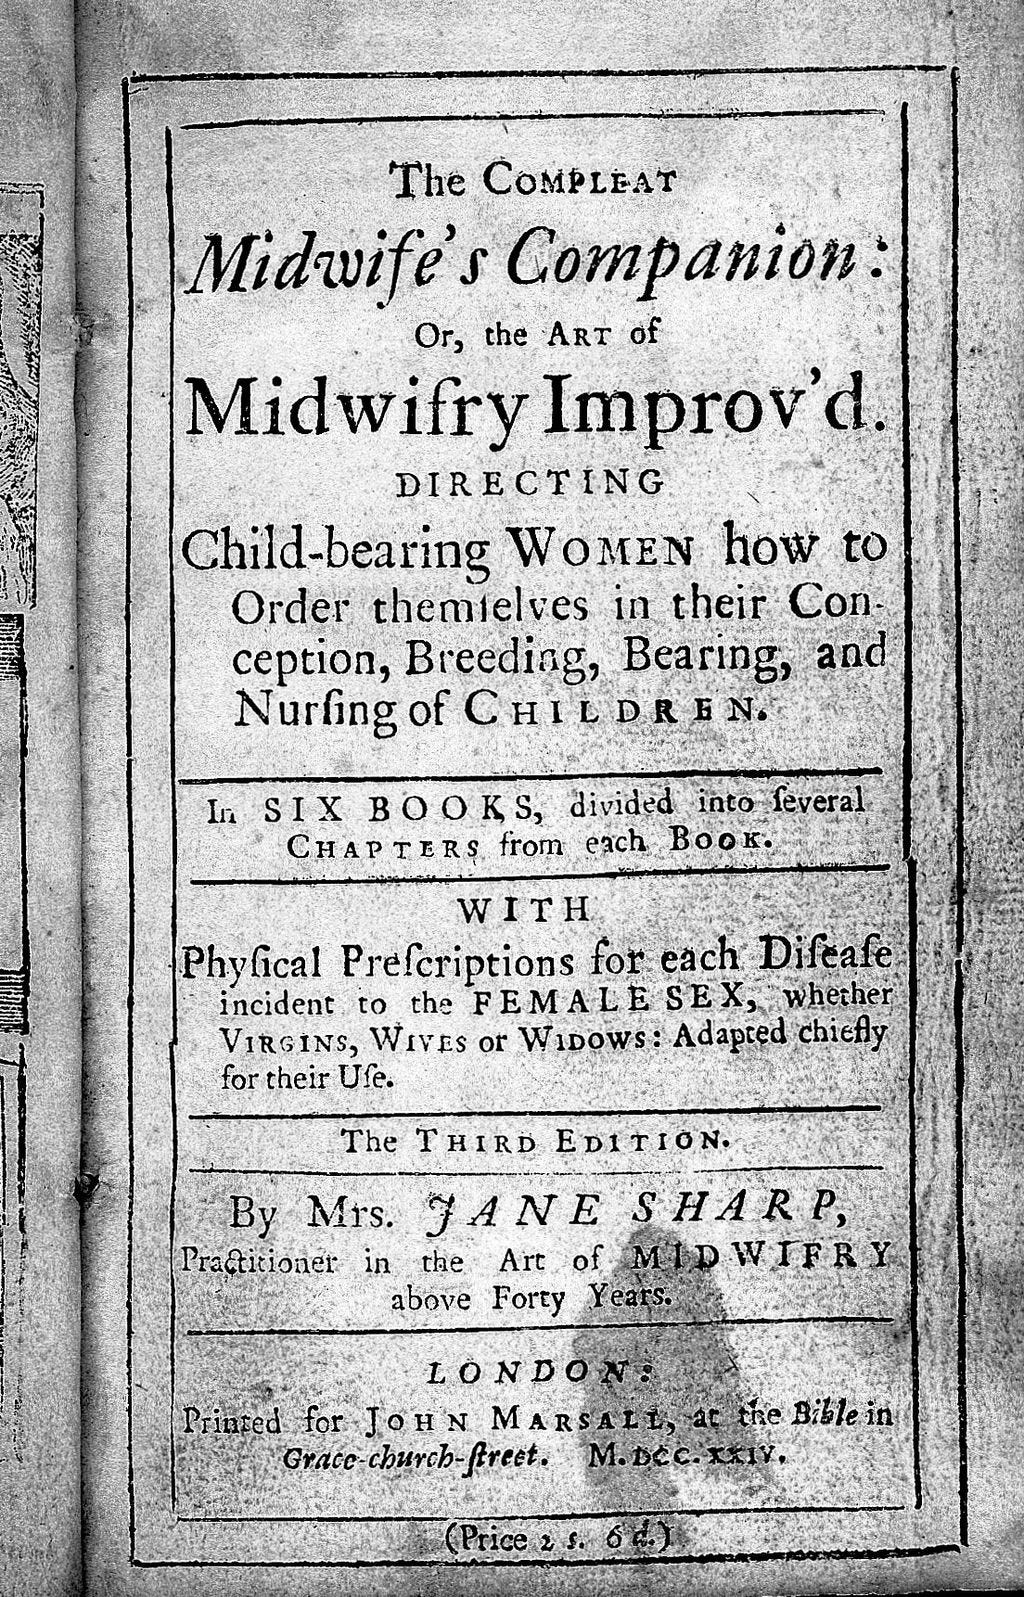 J. Sharp, "The Compleat Midwife's Companion..." Wellcome L0028110.jpg